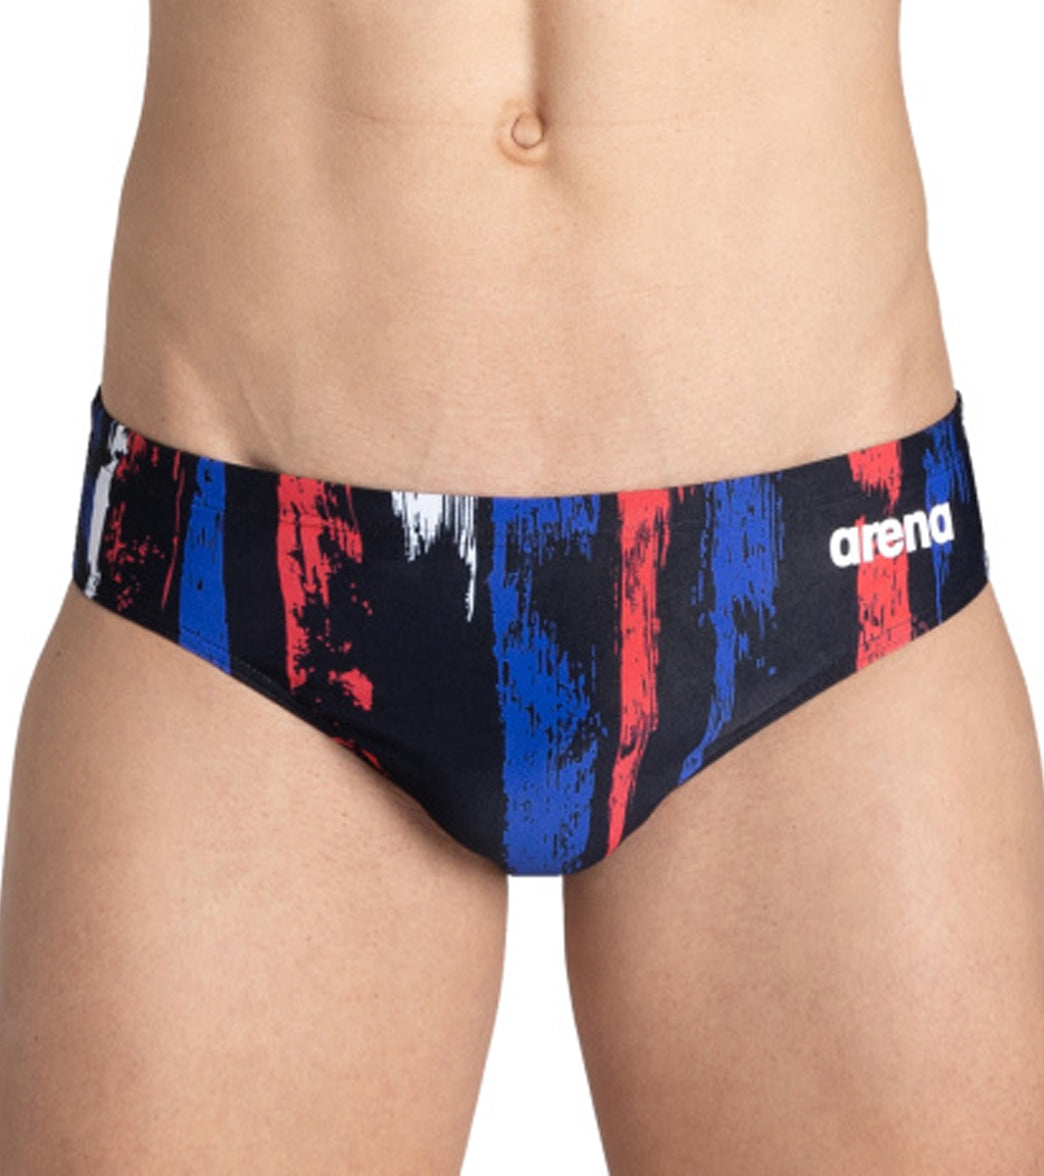 Arena Men's Team Painted Stripes Brief Swimsuit - Black/Multi White 24 Polyester - Swimoutlet.com